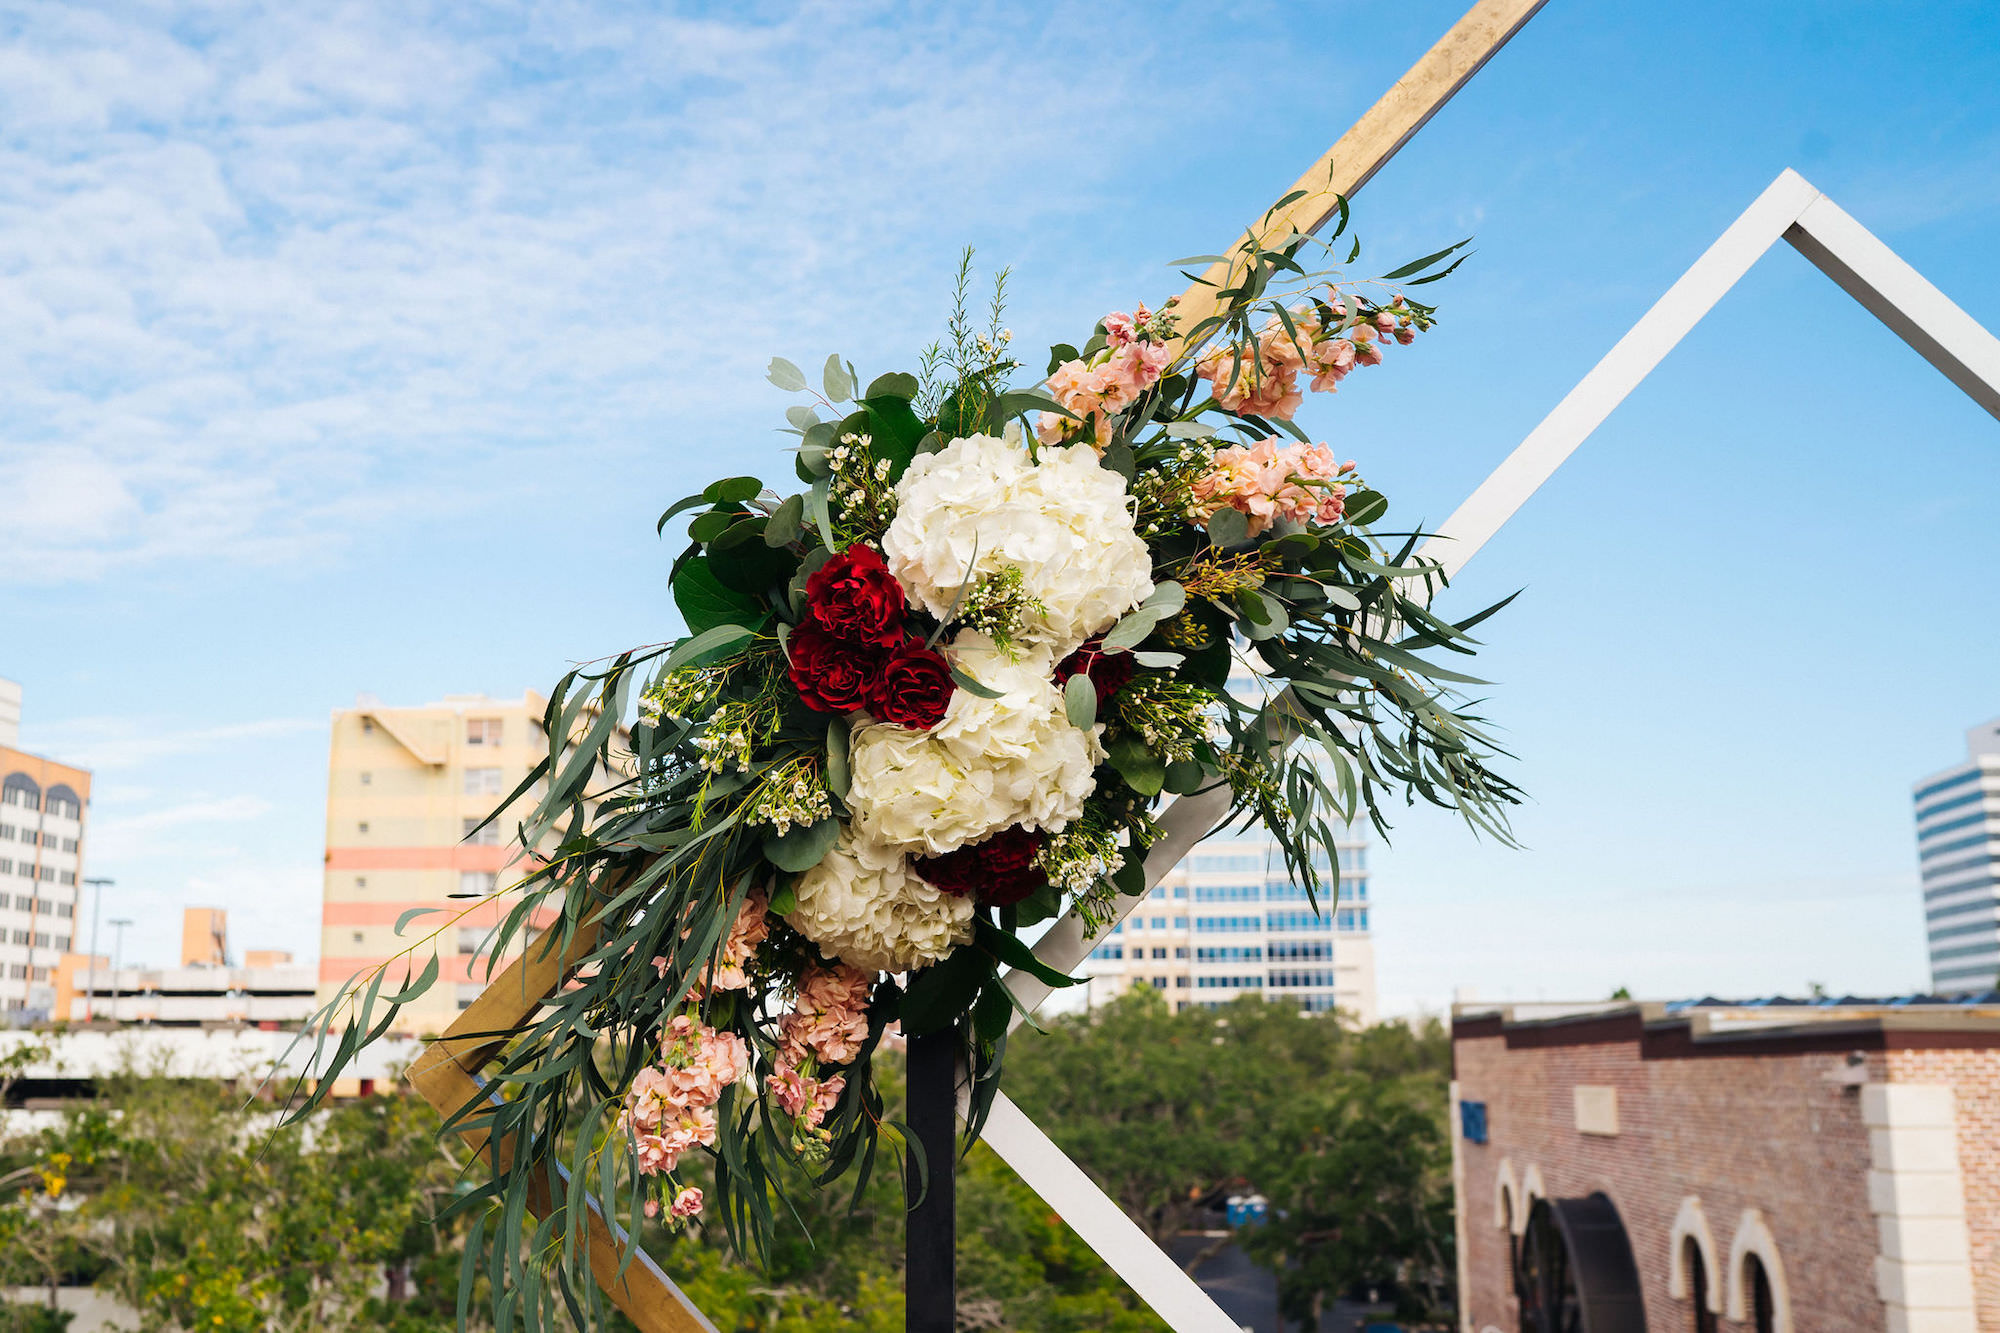 Blush Red Garnet Greenery Floral Arrangement | Rooftop Geometric Gold Ceremony Arch Backdrop